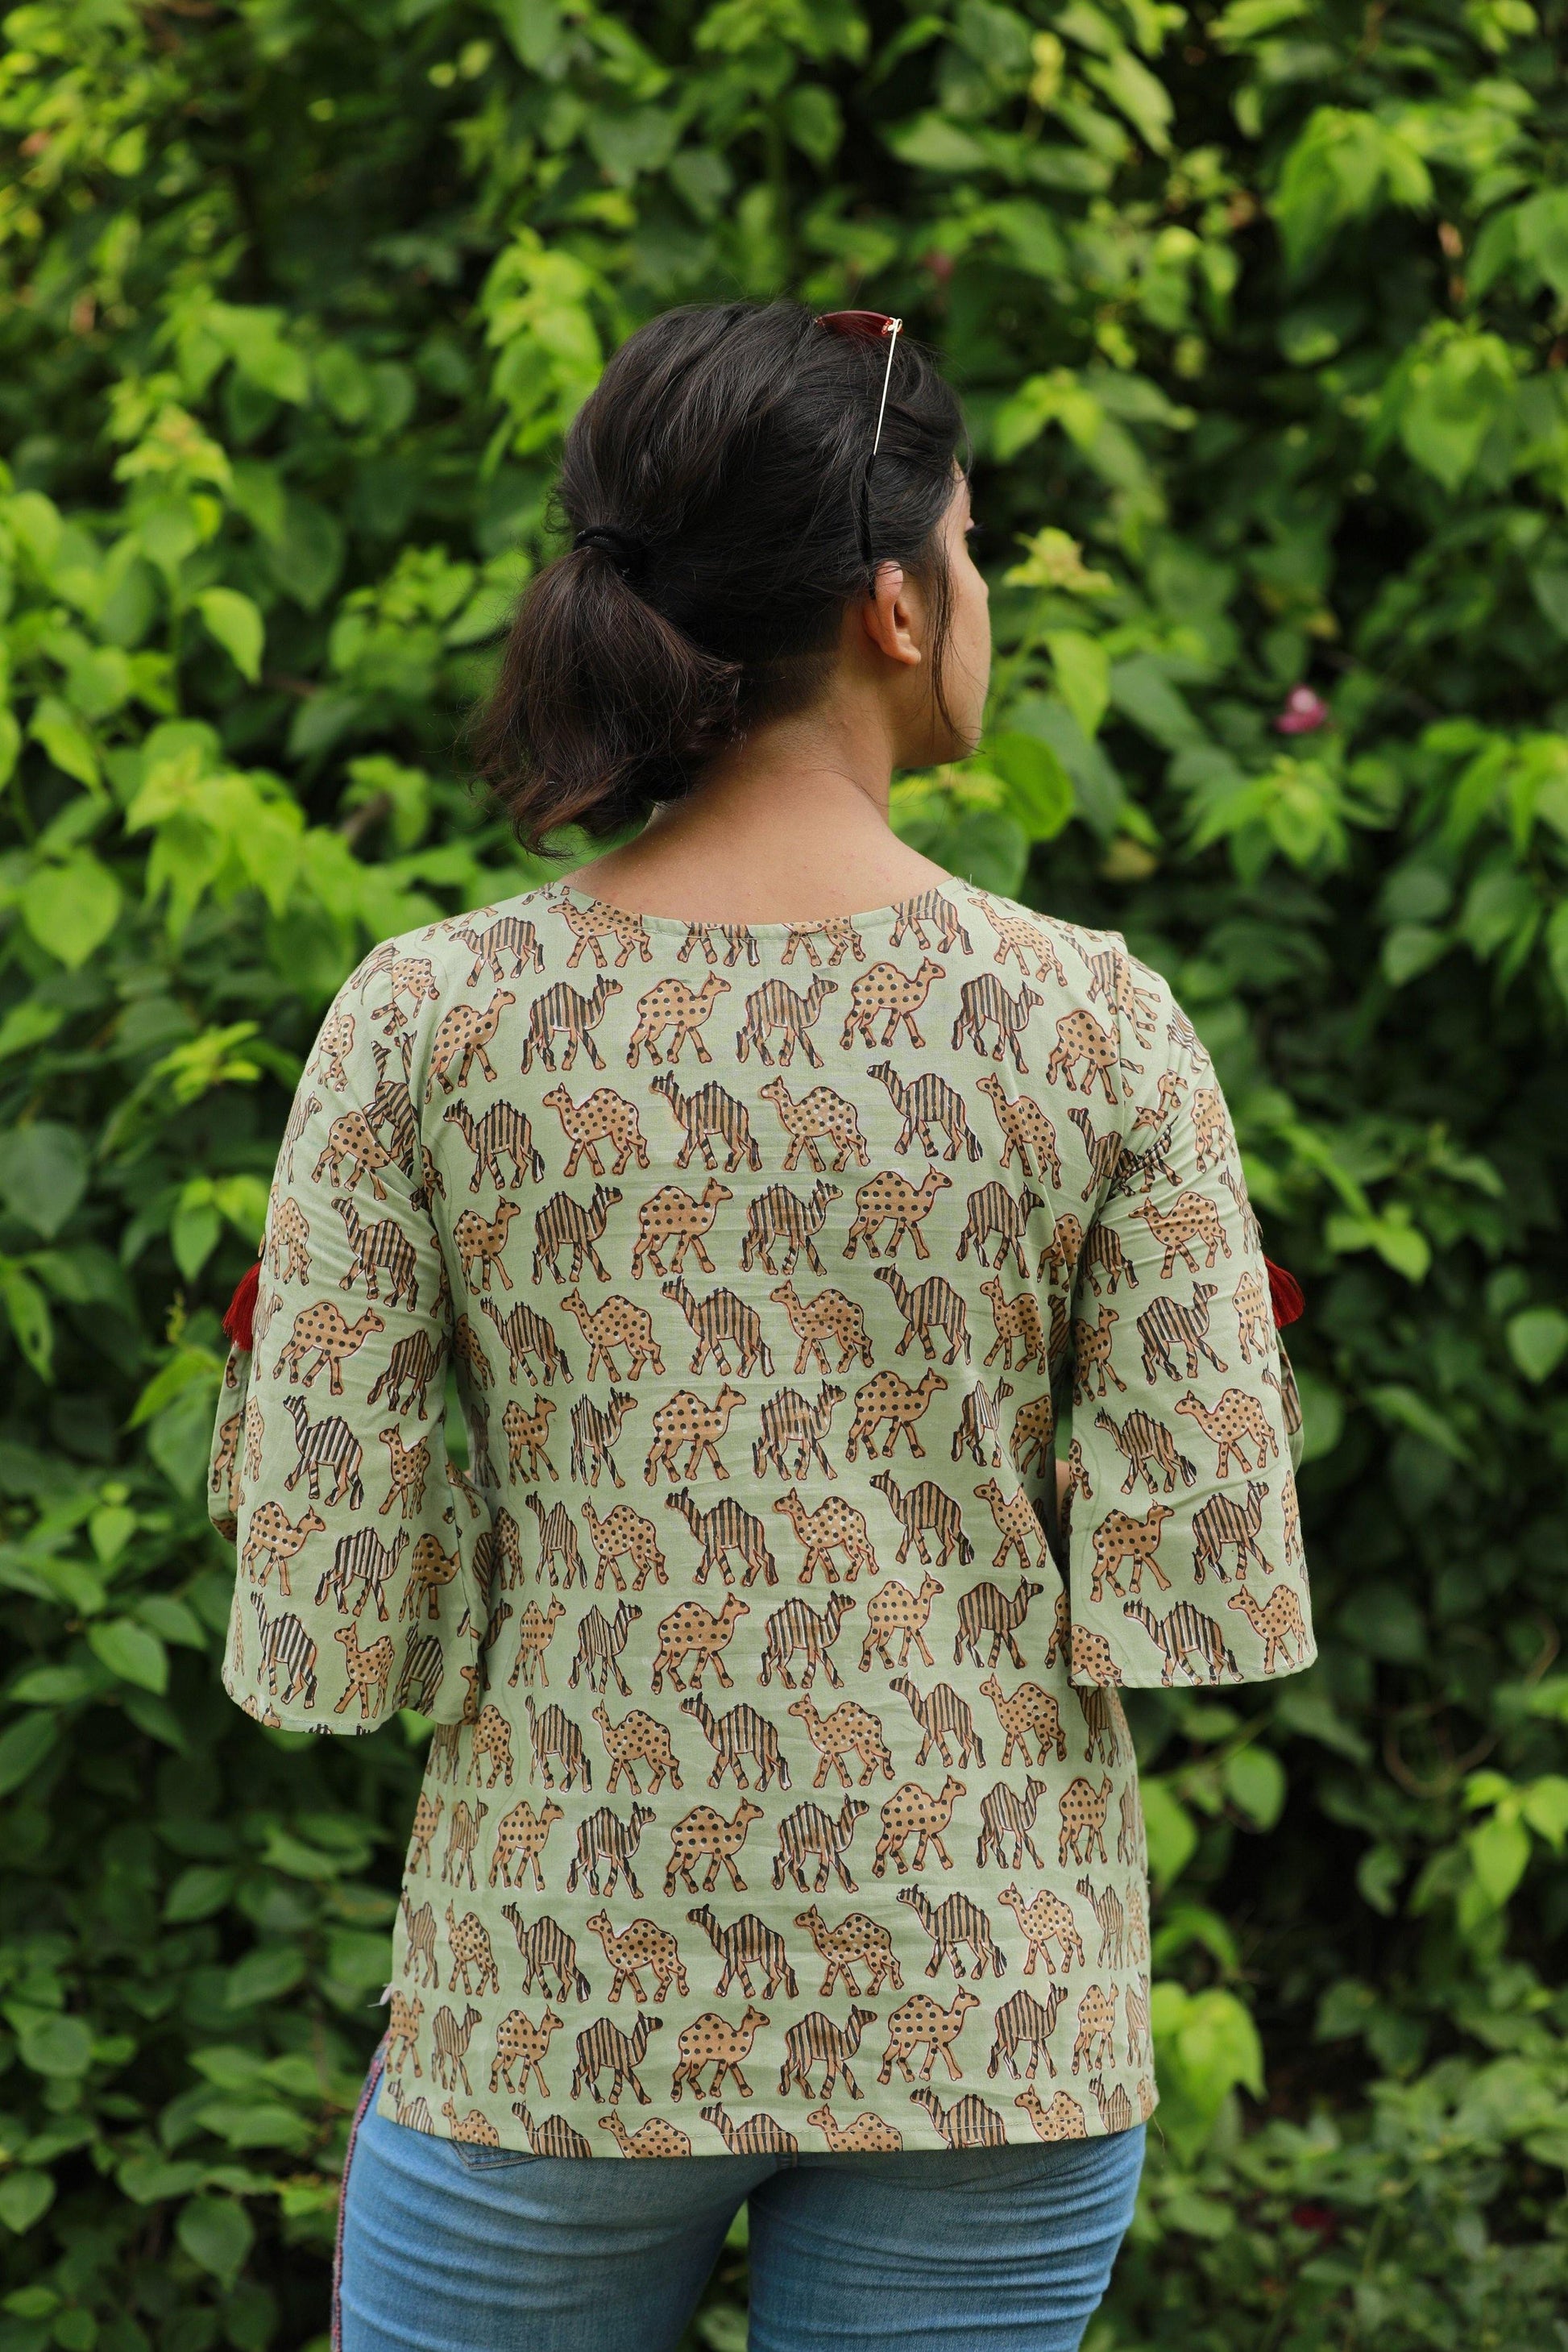 Camel print top - www.silayi.in